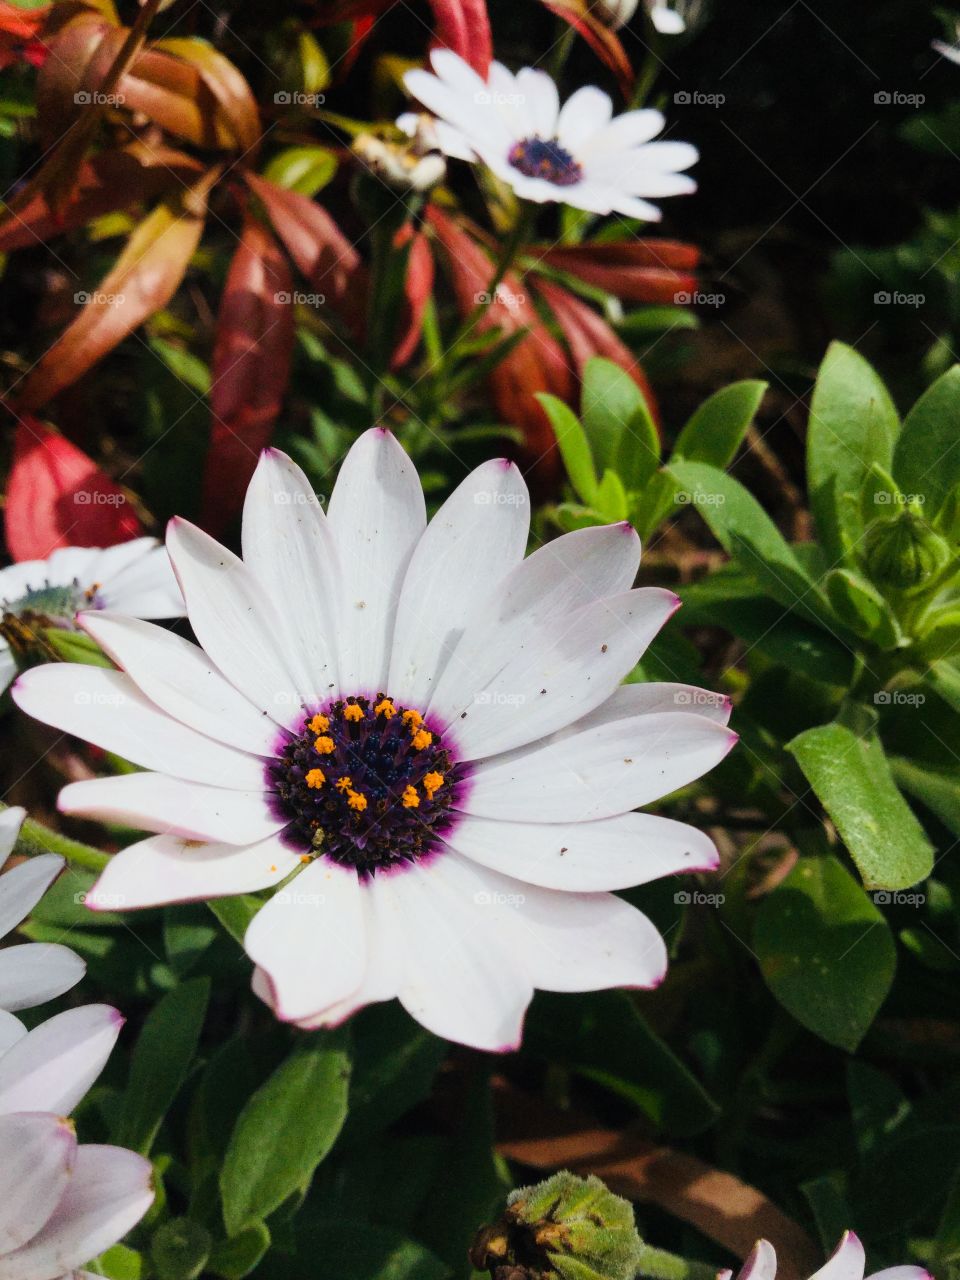 This is a photo of a white flower with a purple and orange middle. It has red and green leaves in the background.